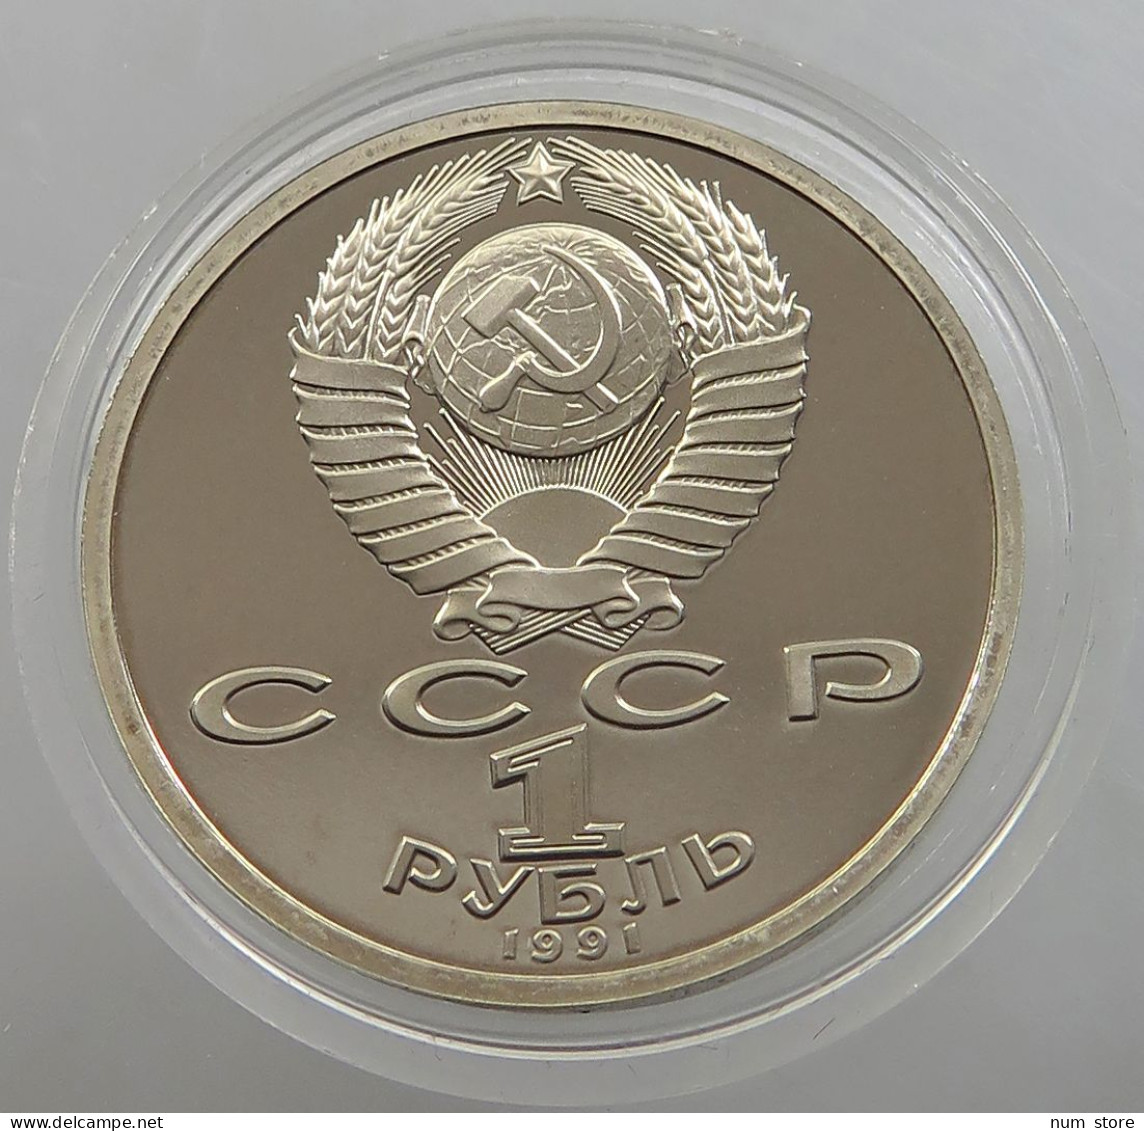 RUSSIA USSR 1 ROUBLE 1991 IVANOV PROOF #sm14 0505 - Russia